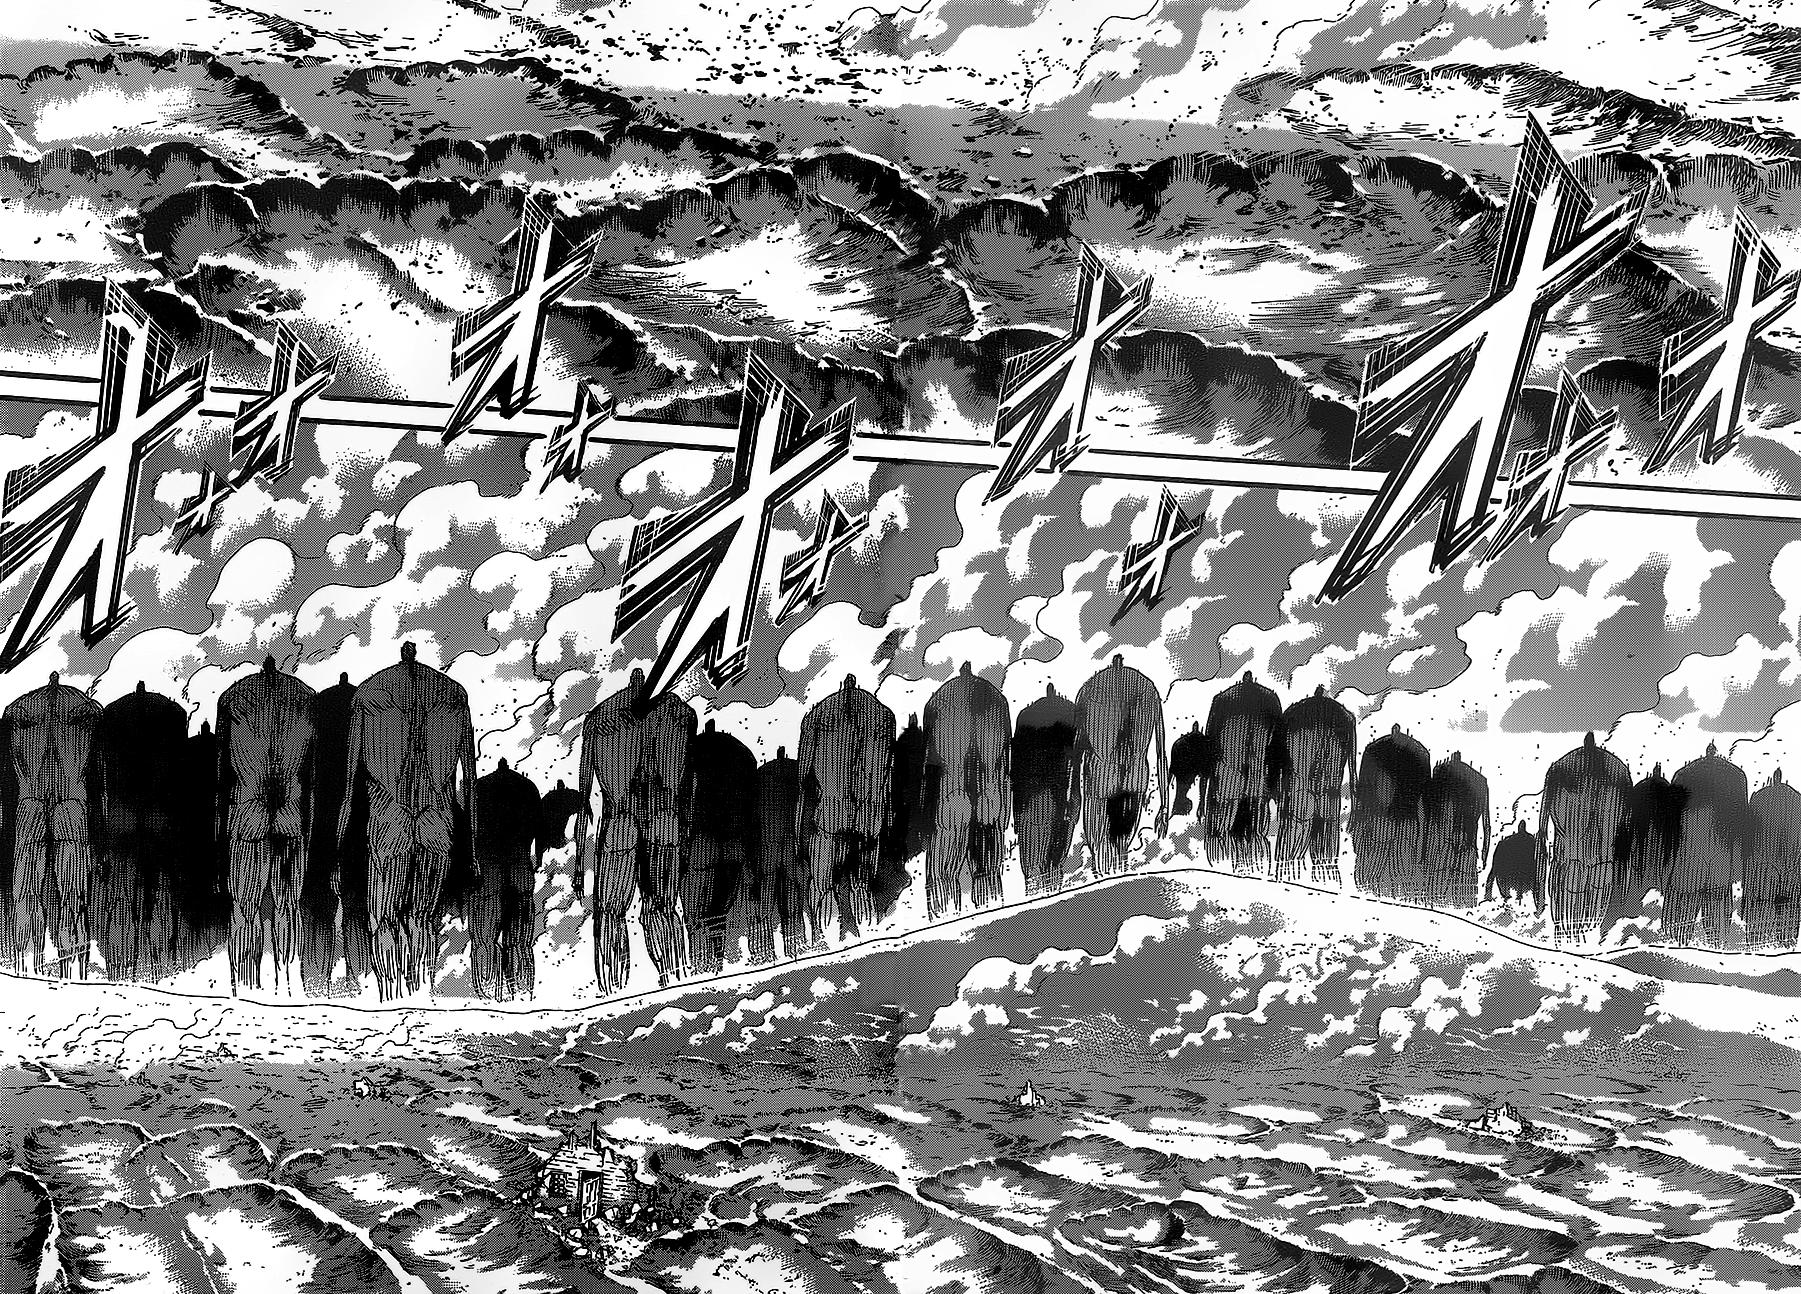 Read Attack On Titan Chapter 131: Rumbling - Mangadex